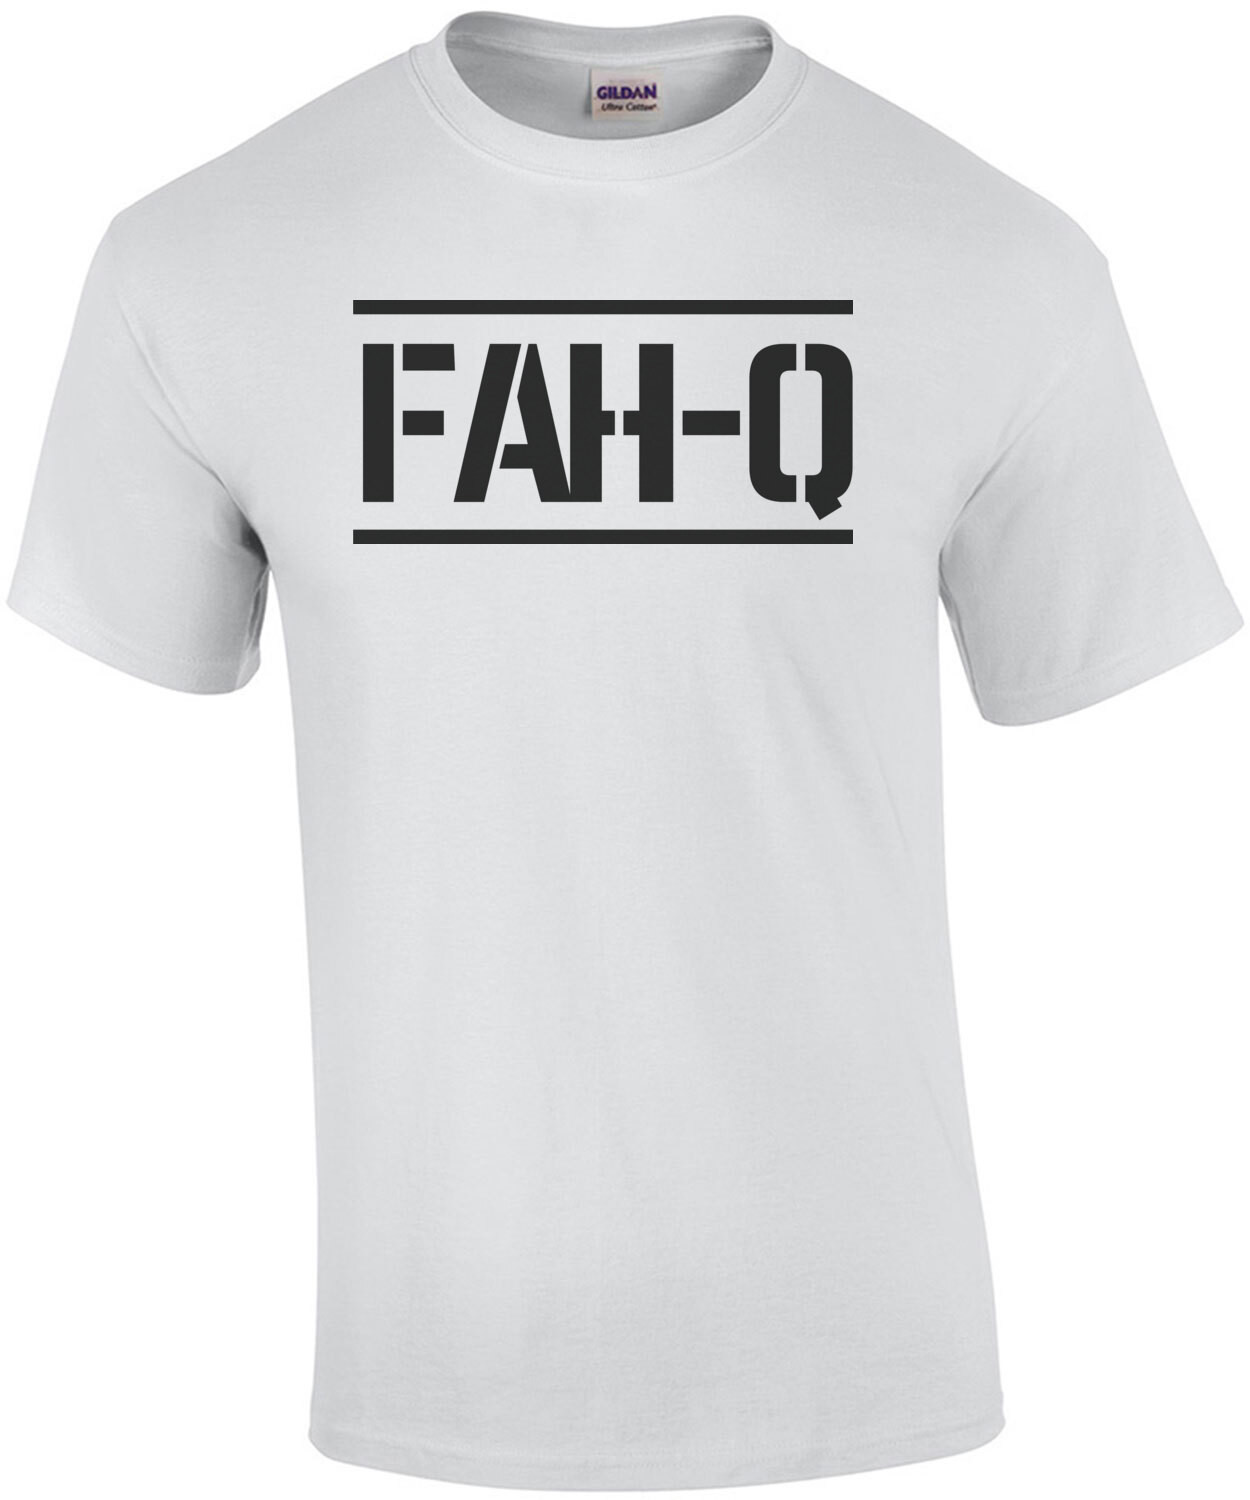 FAH-Q - Dazed and Confused - 90's T-Shirt